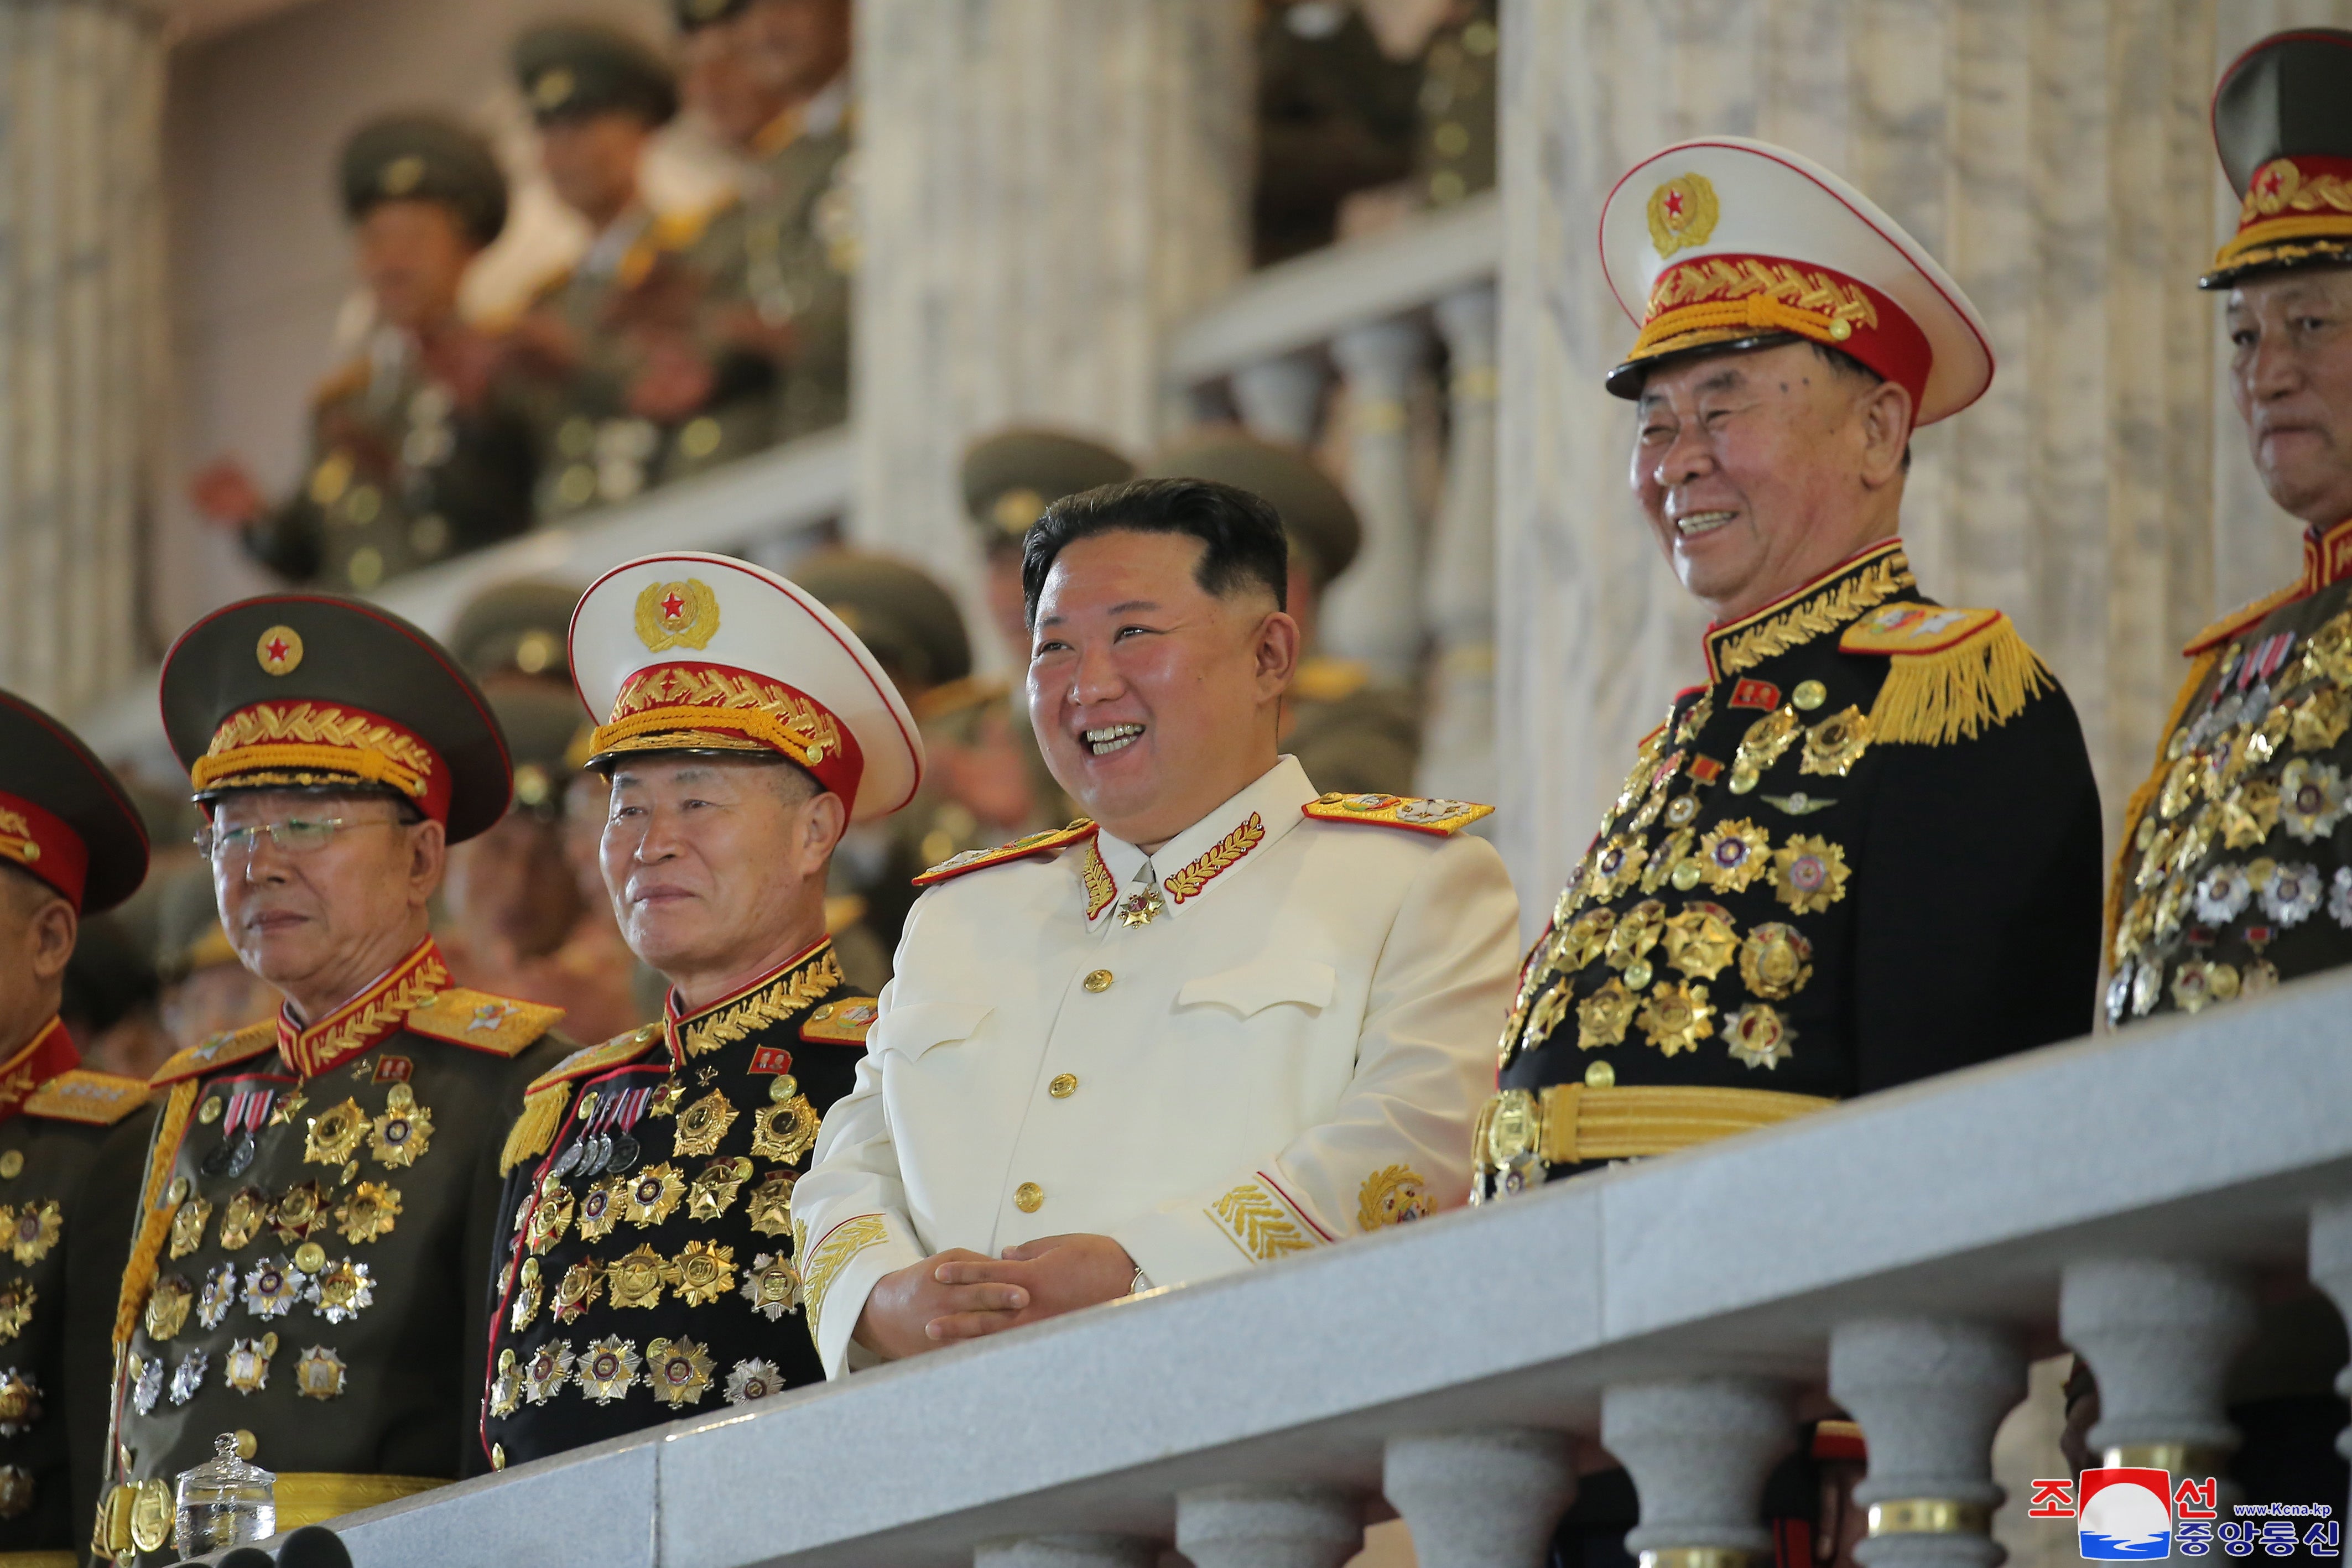 A photo released by the state-run North Korea news agency shows Kim, centre, presiding over a military parade